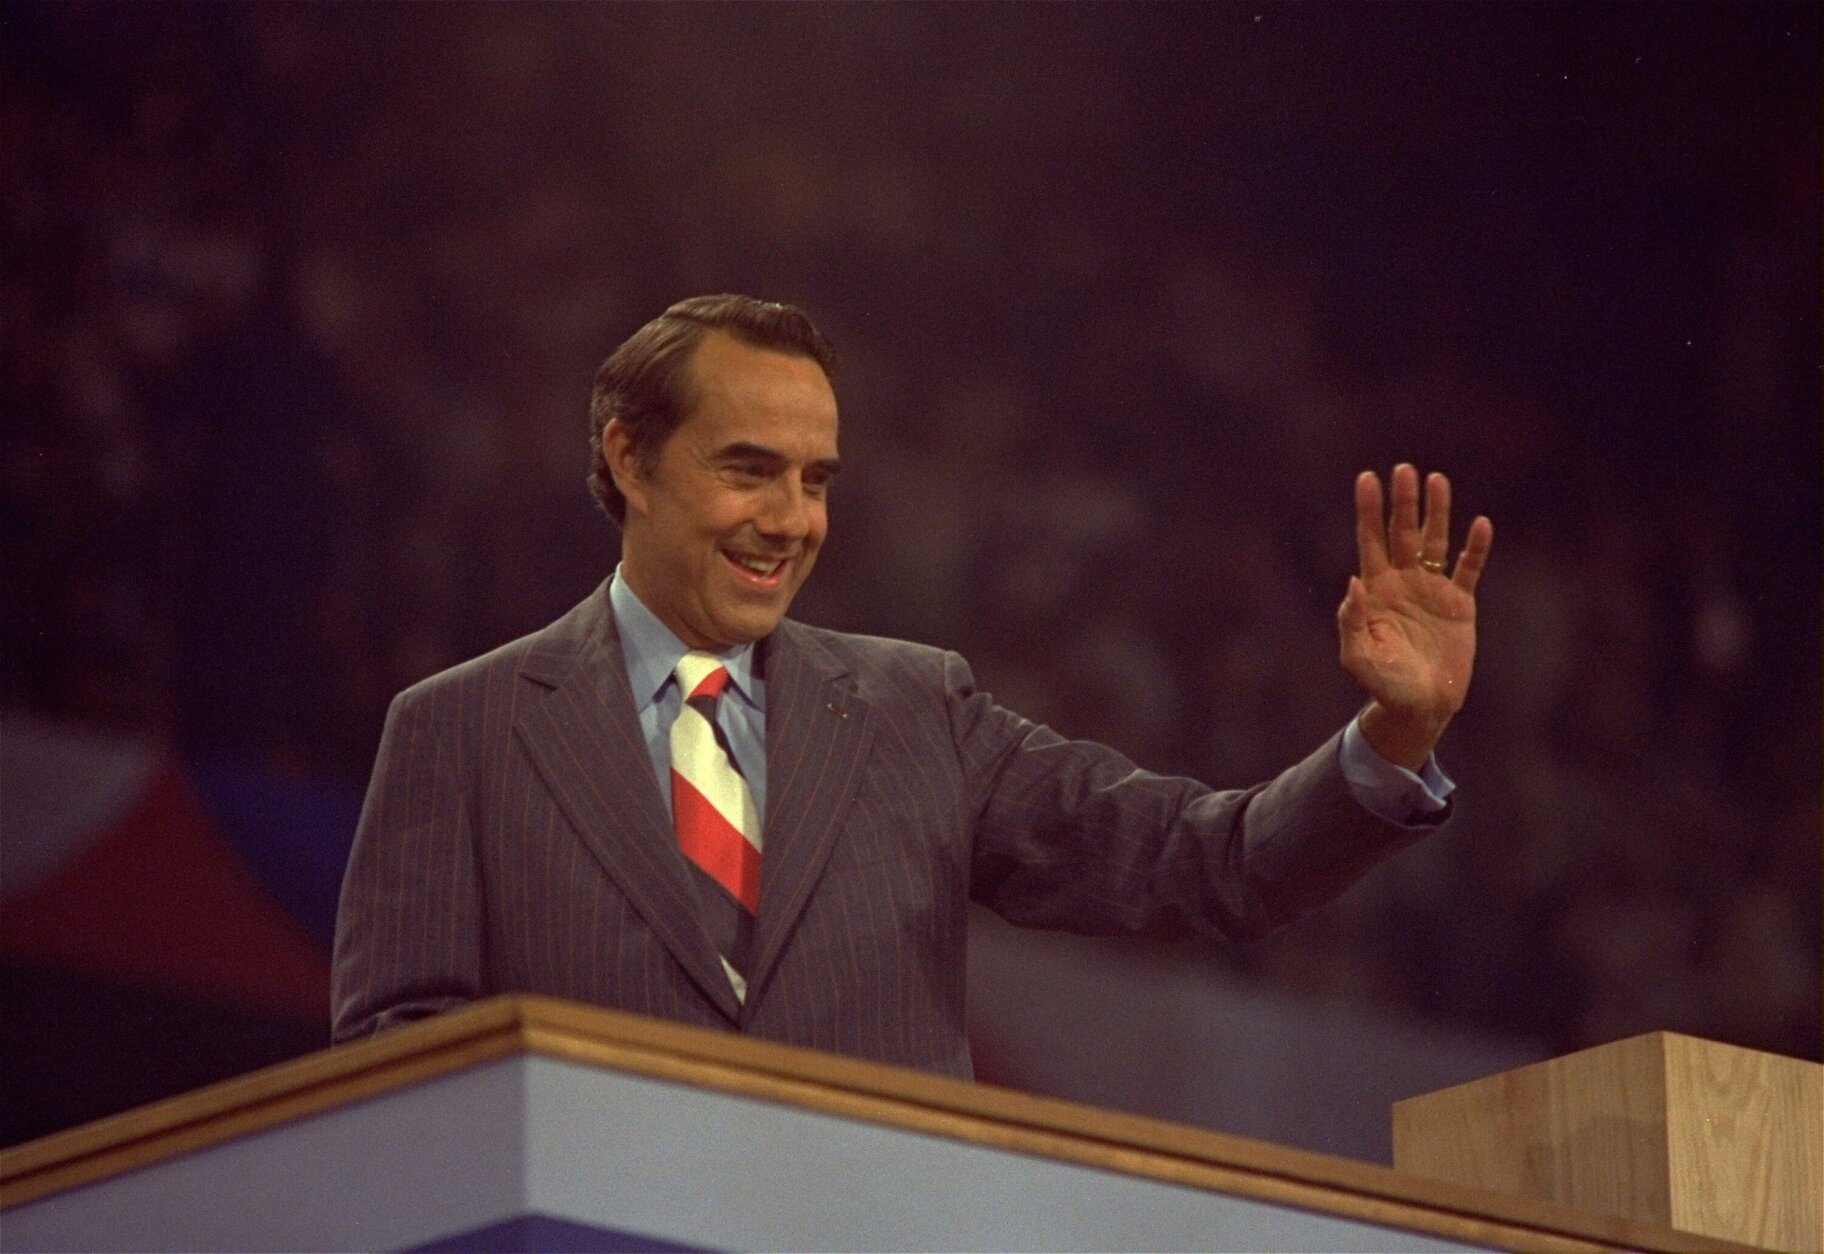 Sen. Robert Dole (R-Kansas) shown speaking and waving to crowds at the National Republican Convention in Kemper Arena, Kansas City, Mo. on August 19, 1976. (AP PHoto)